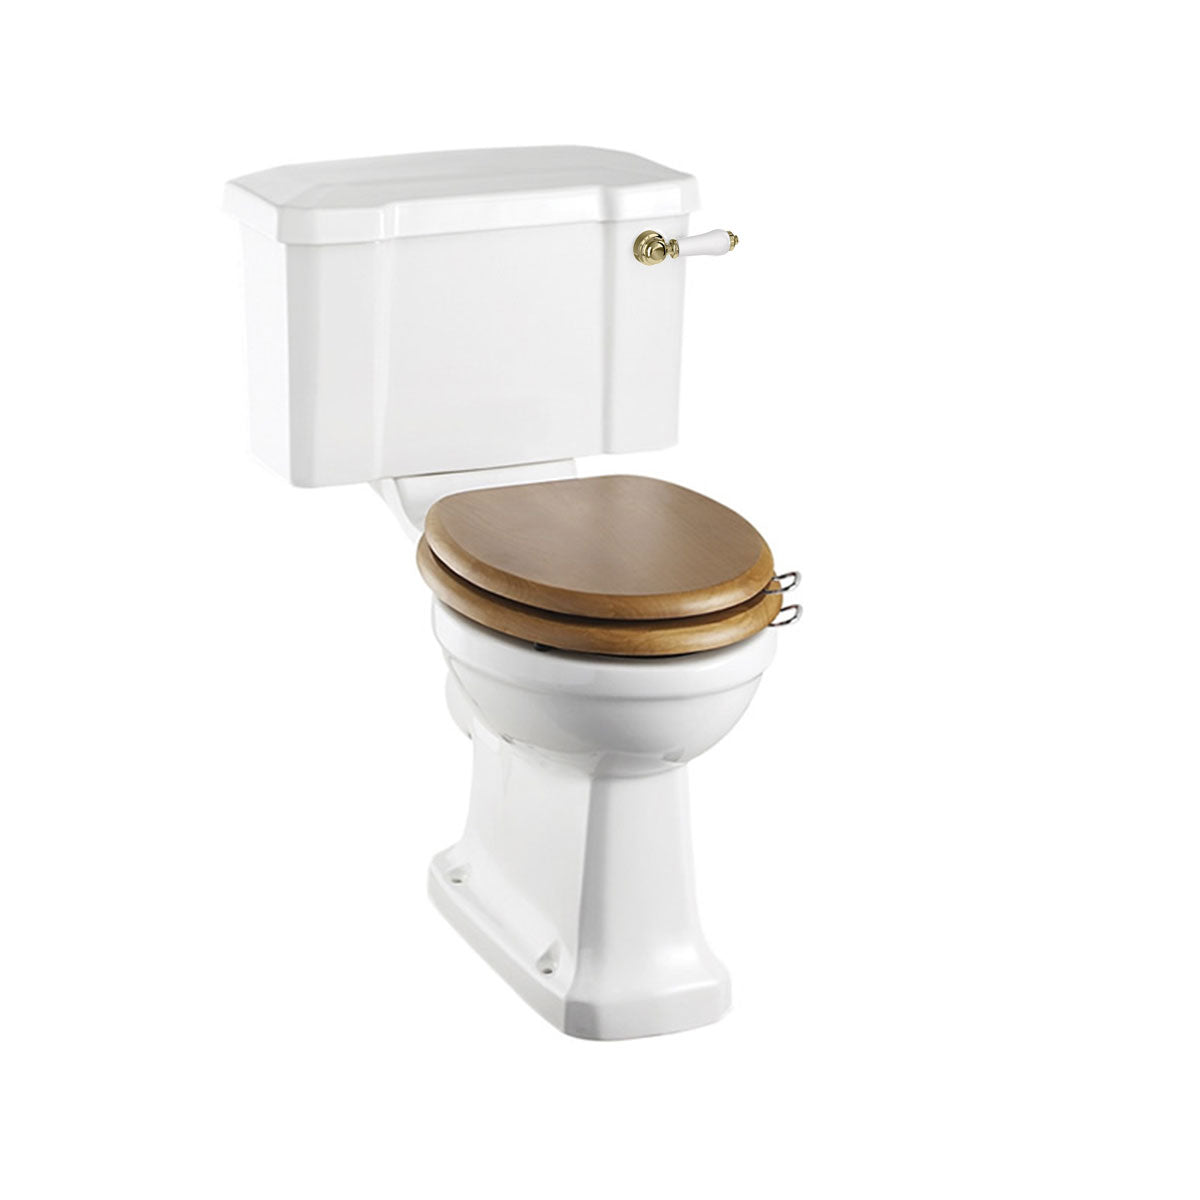 Burlington Standard Traditional Close Coupled Toilet with gold flush lever Deluxe Bathrooms UK